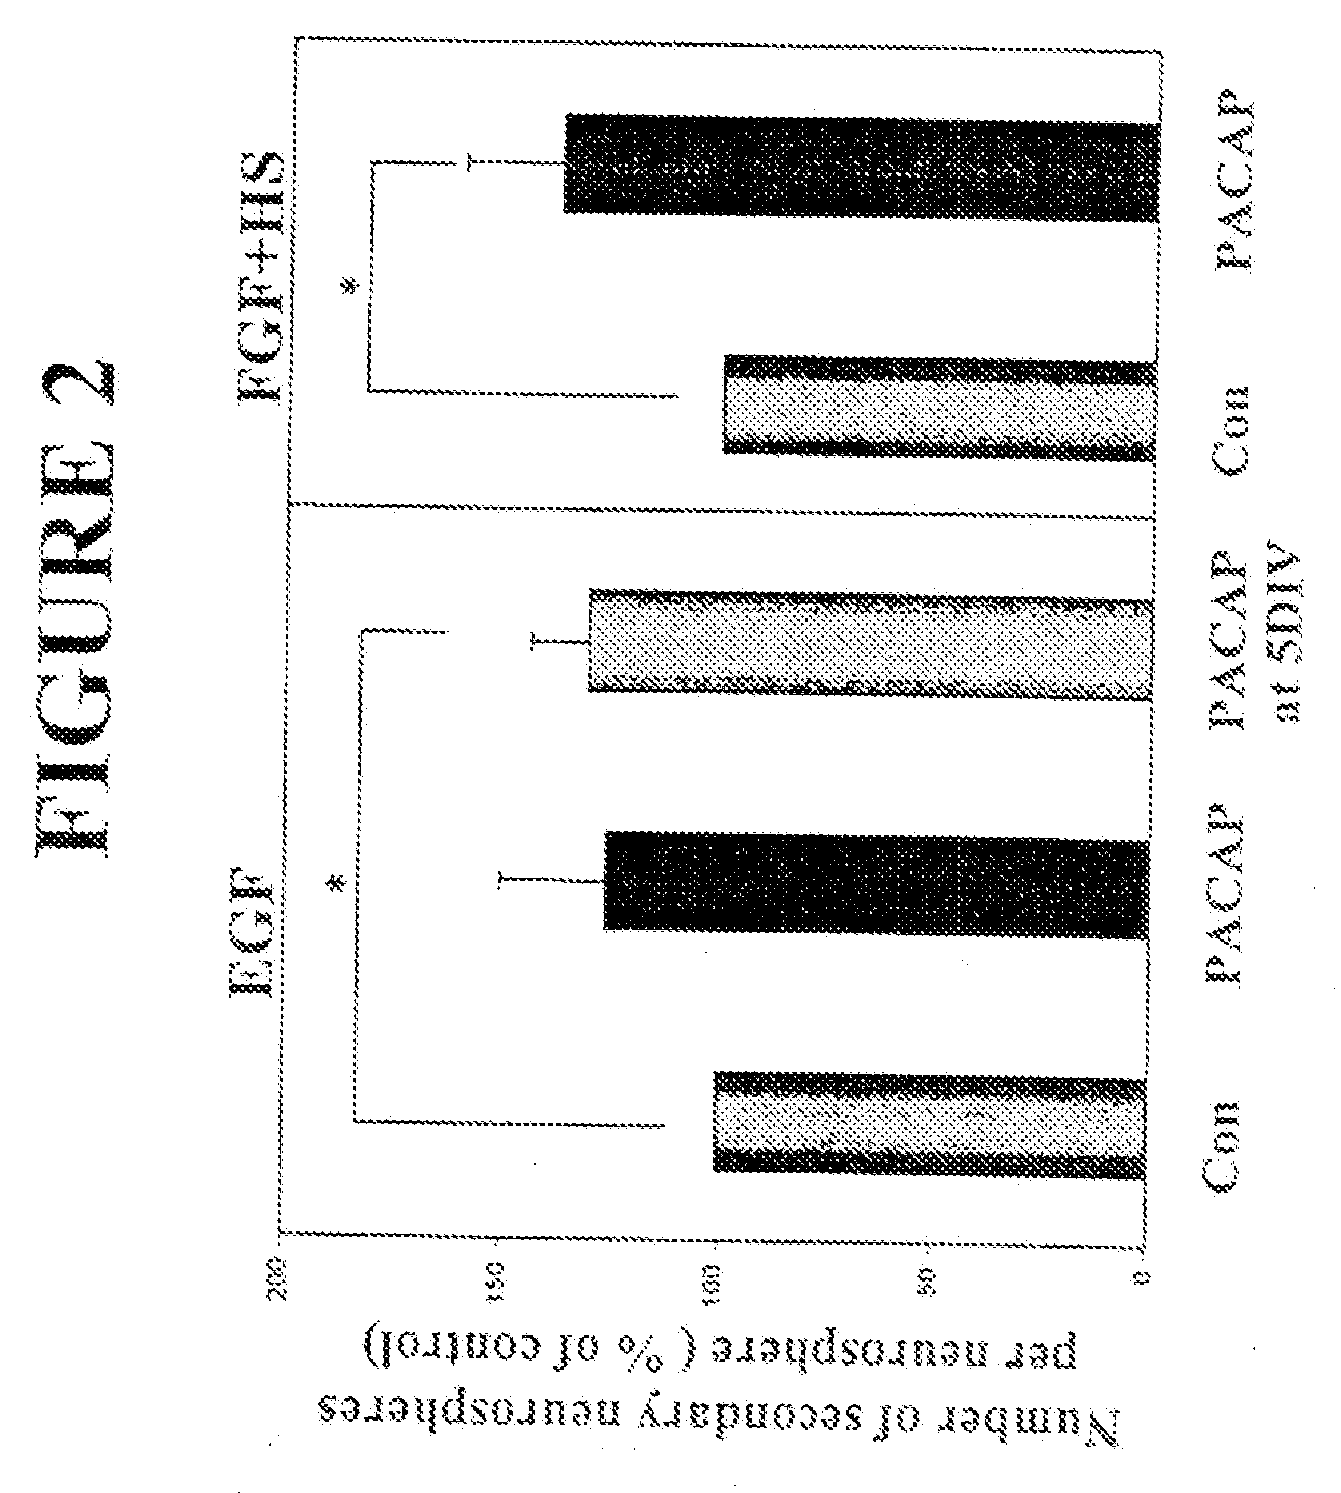 Method of Enhancing Neural Stem Cell Proliferation, Differentiation, and Survival Using Pituitary Adenylate Cyclase Activating Polypeptide (PACAP)